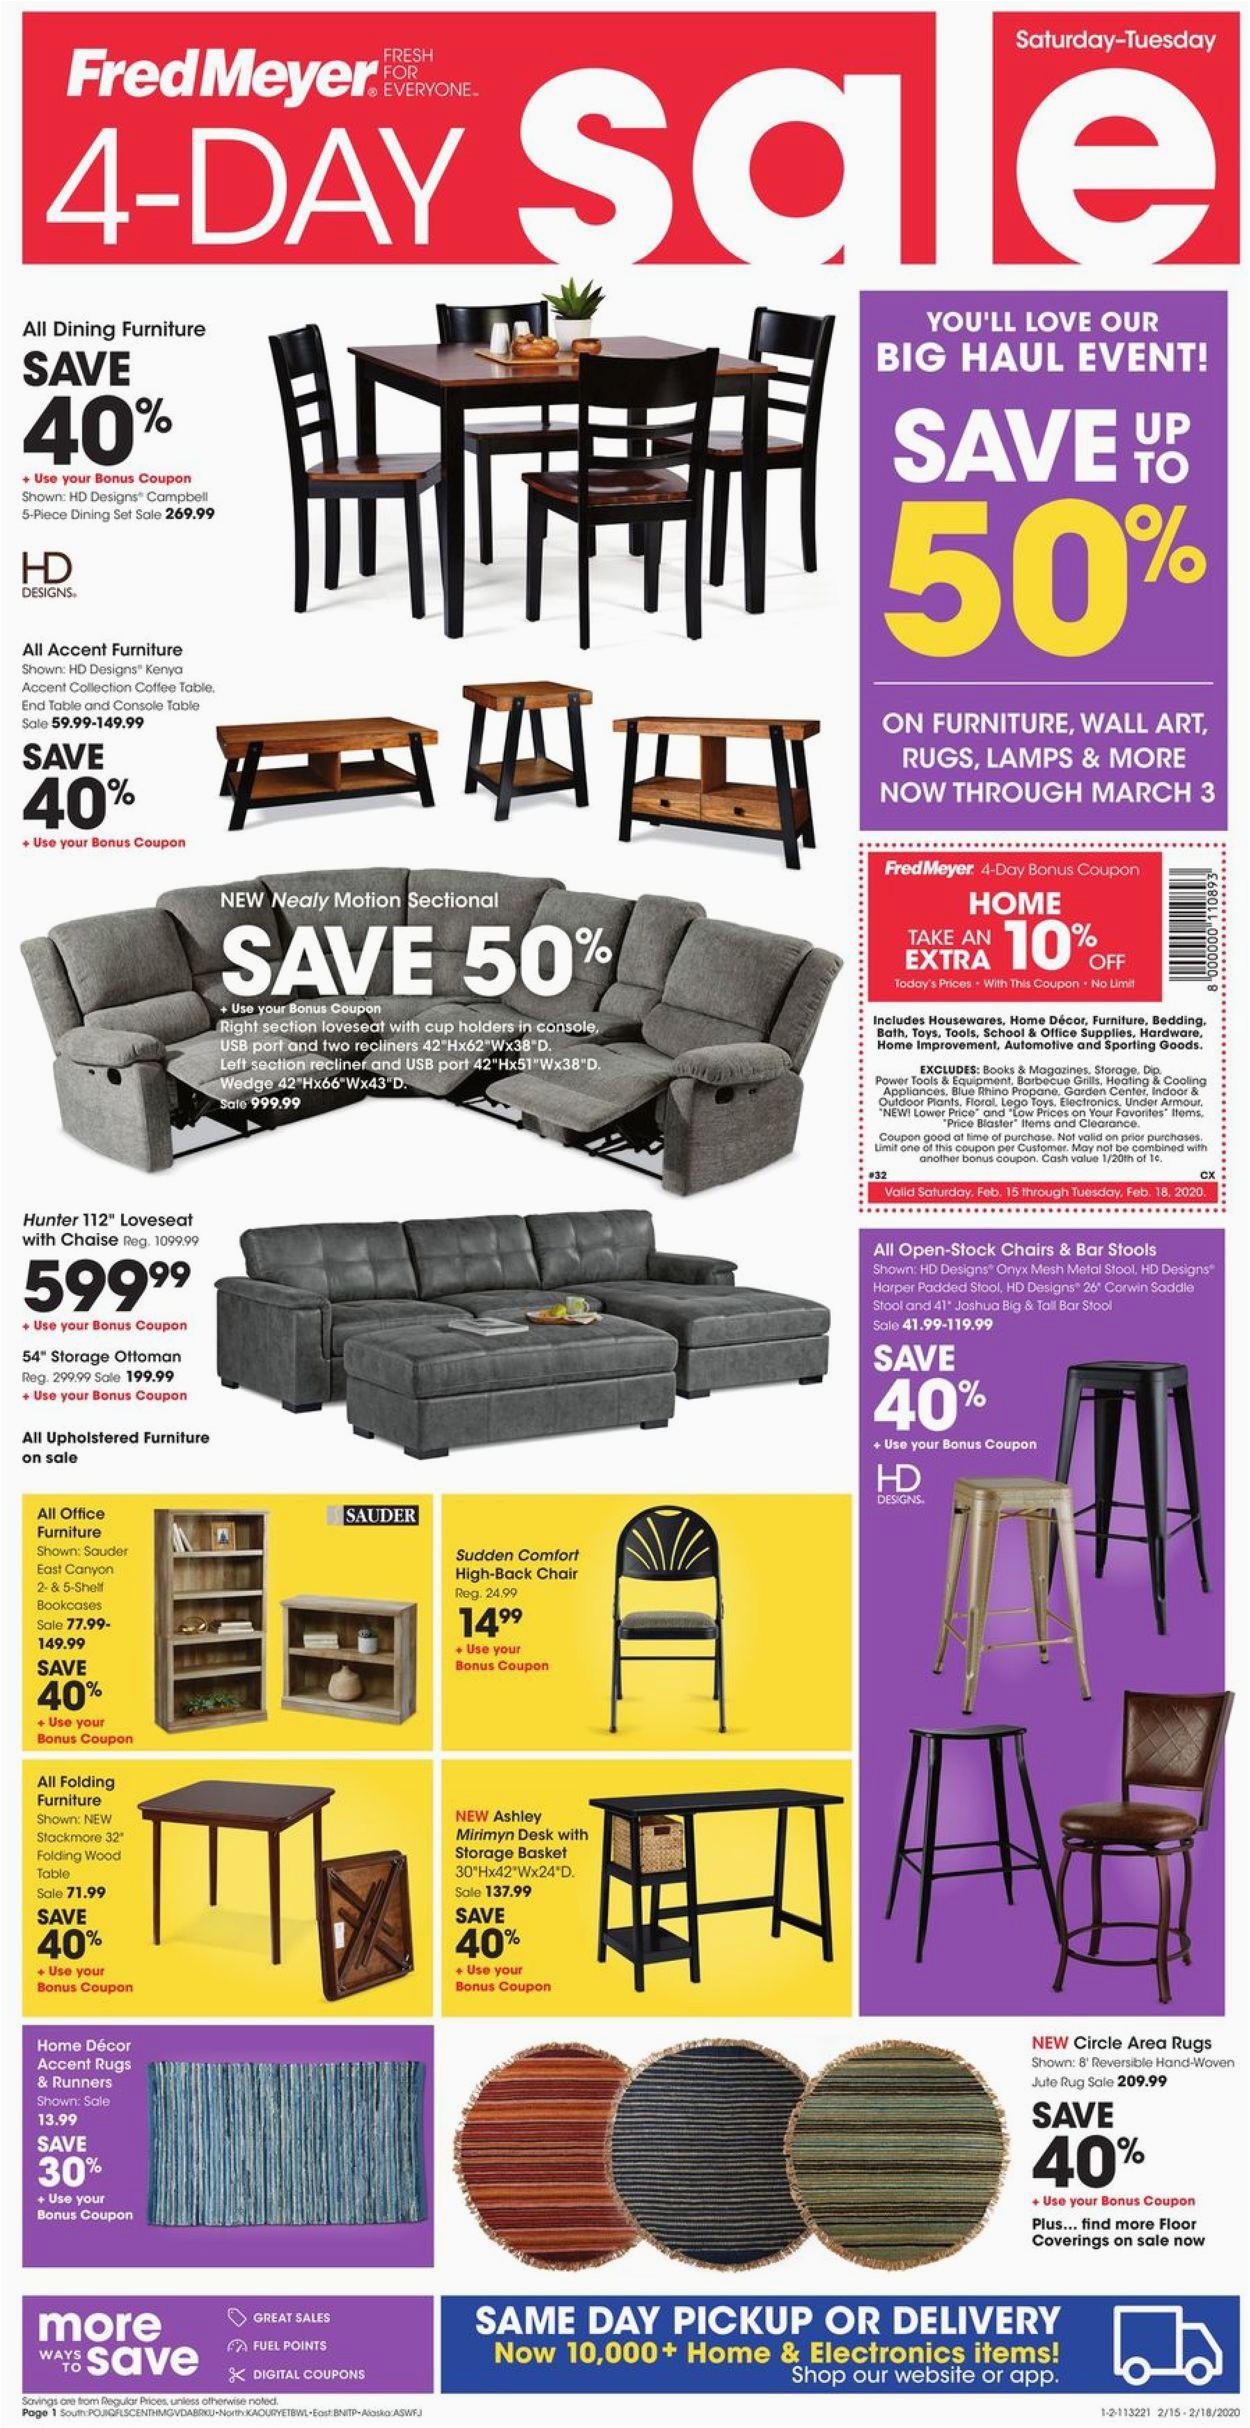 fred meyer weekly ad XSG8Rr4qPD 0